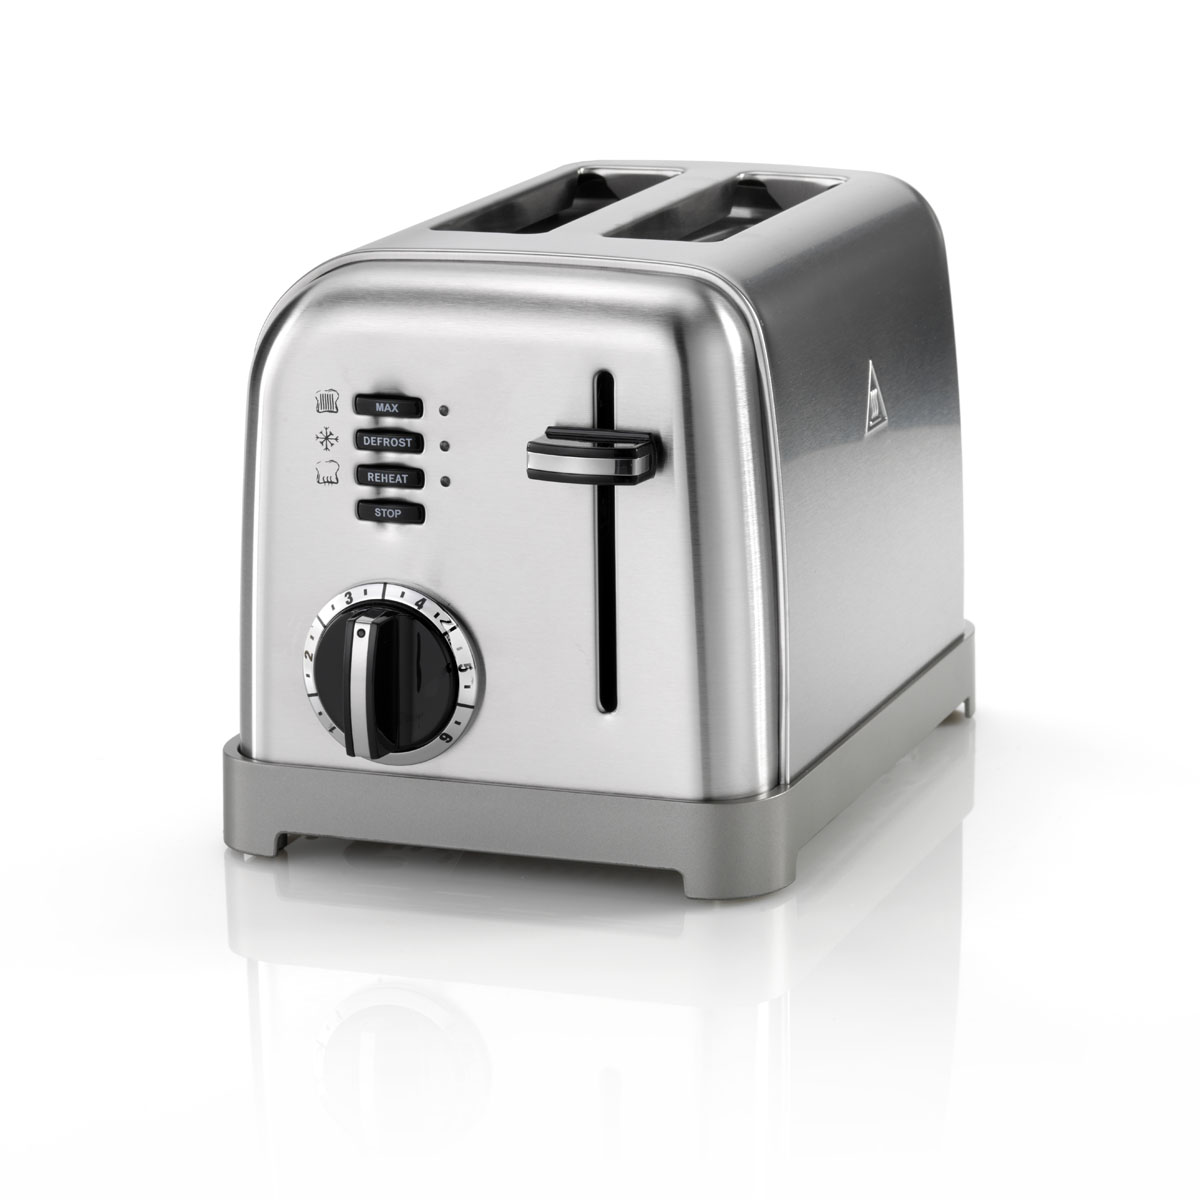 Grille-pain Toaster 2 Tranches 1000W Gris Ardoise - CUISINART